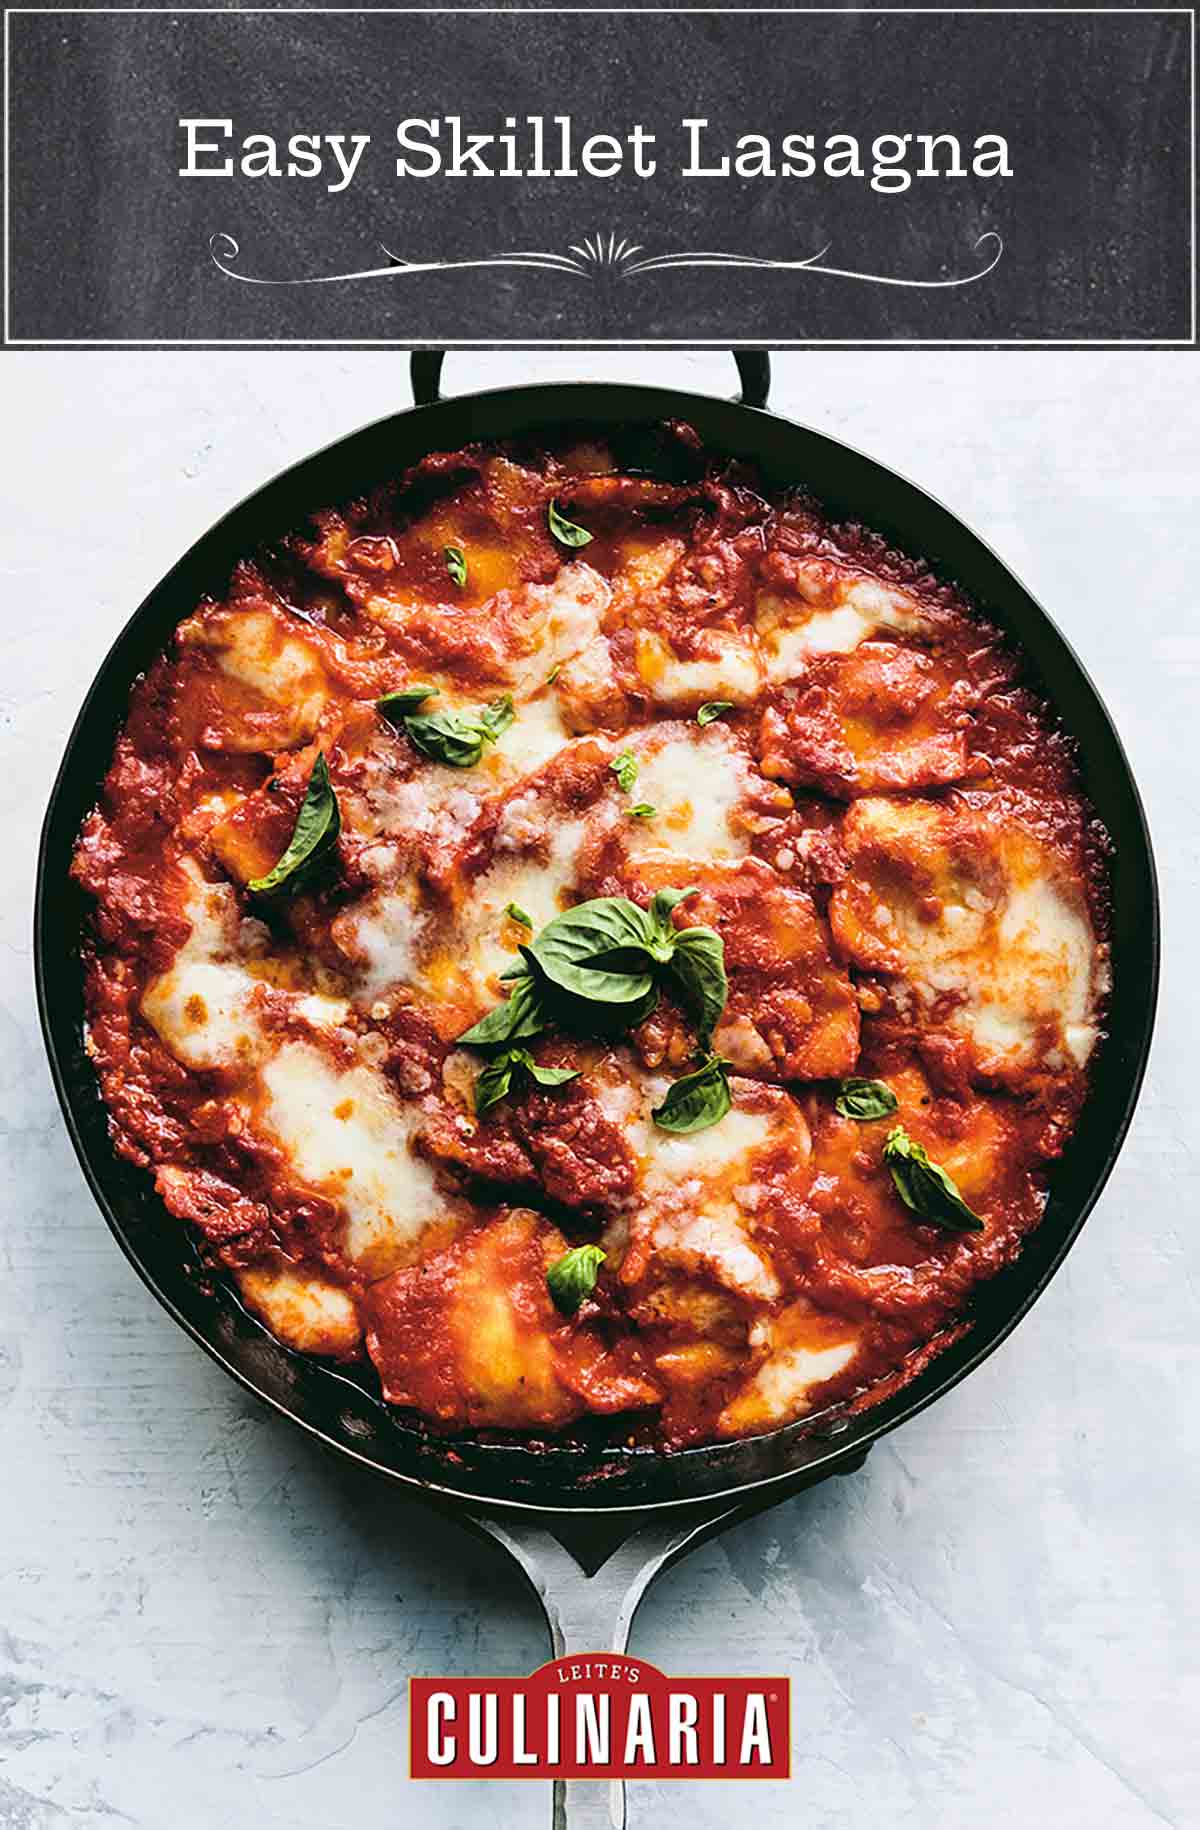 A metal skillet filled with easy skillet lasagna and garnished with basil leaves.